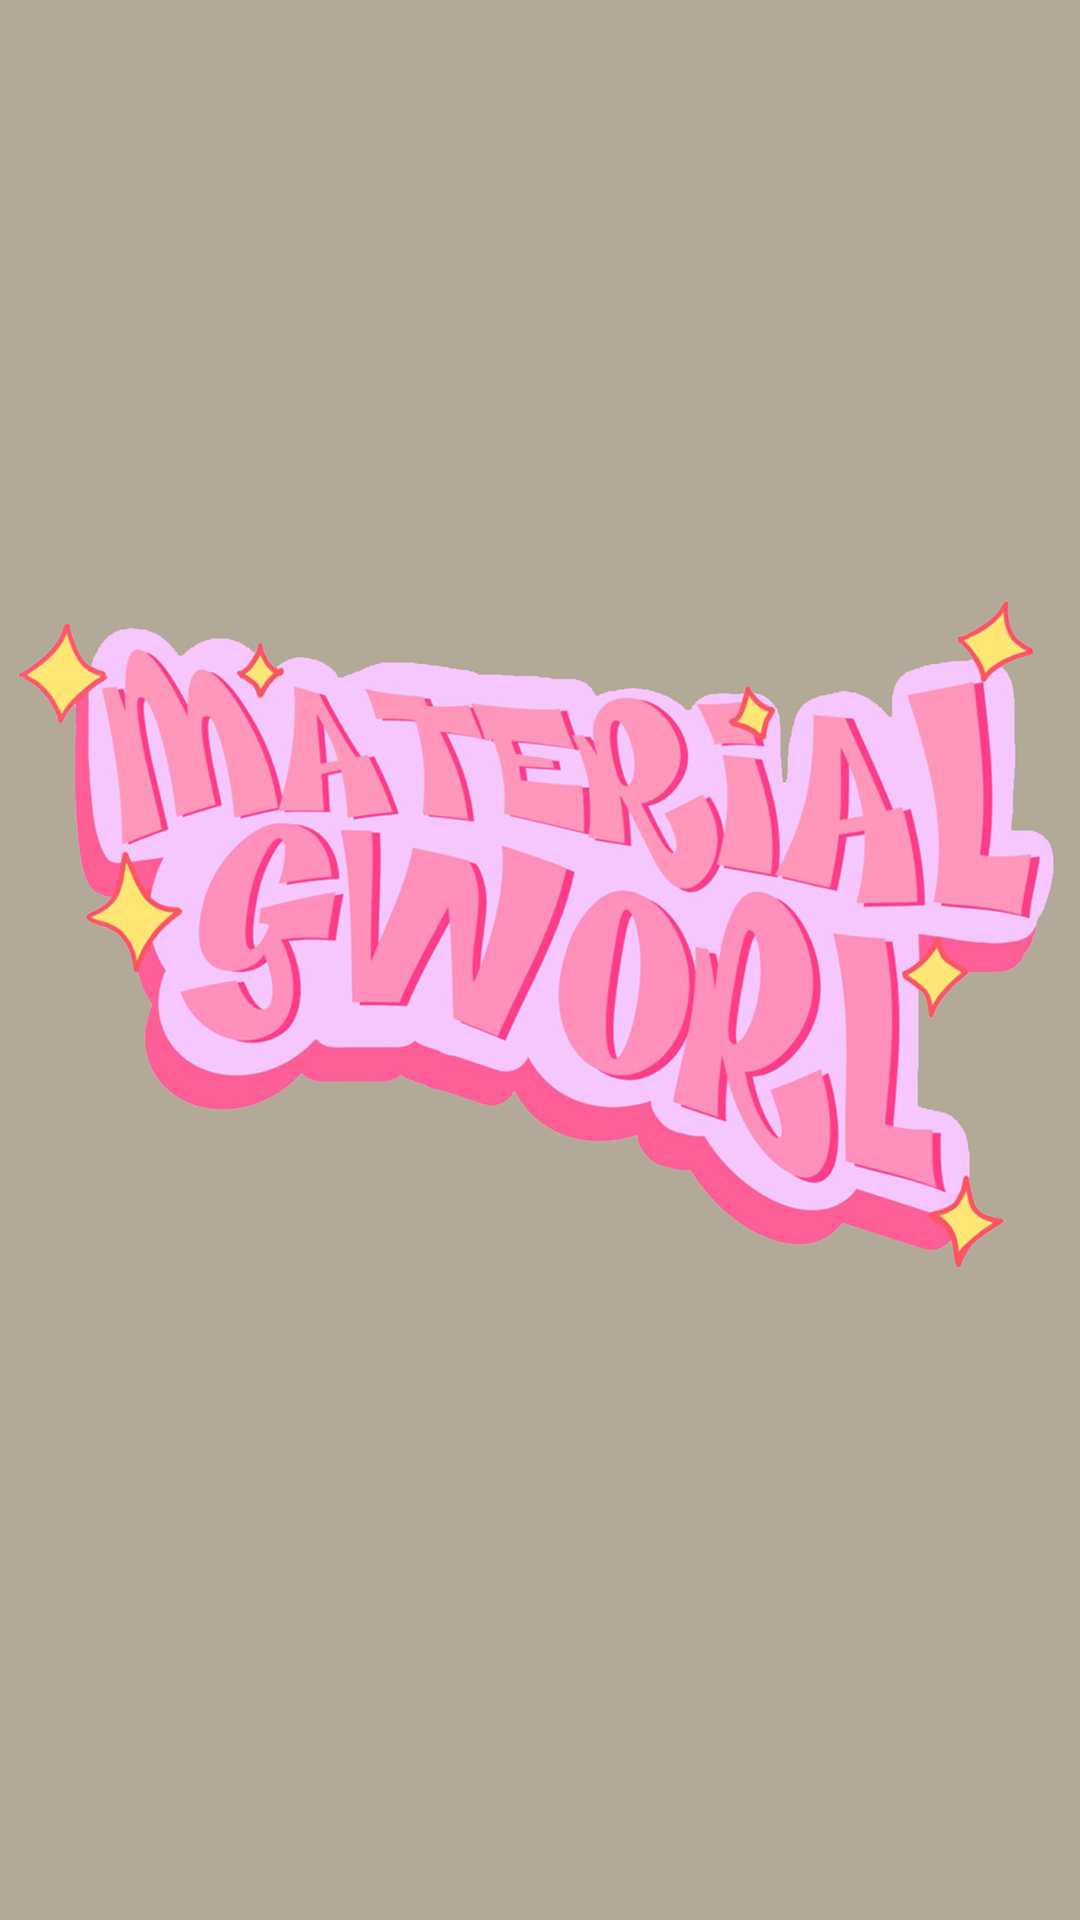 Material Gworl Wallpaper Free Material Gworl Background